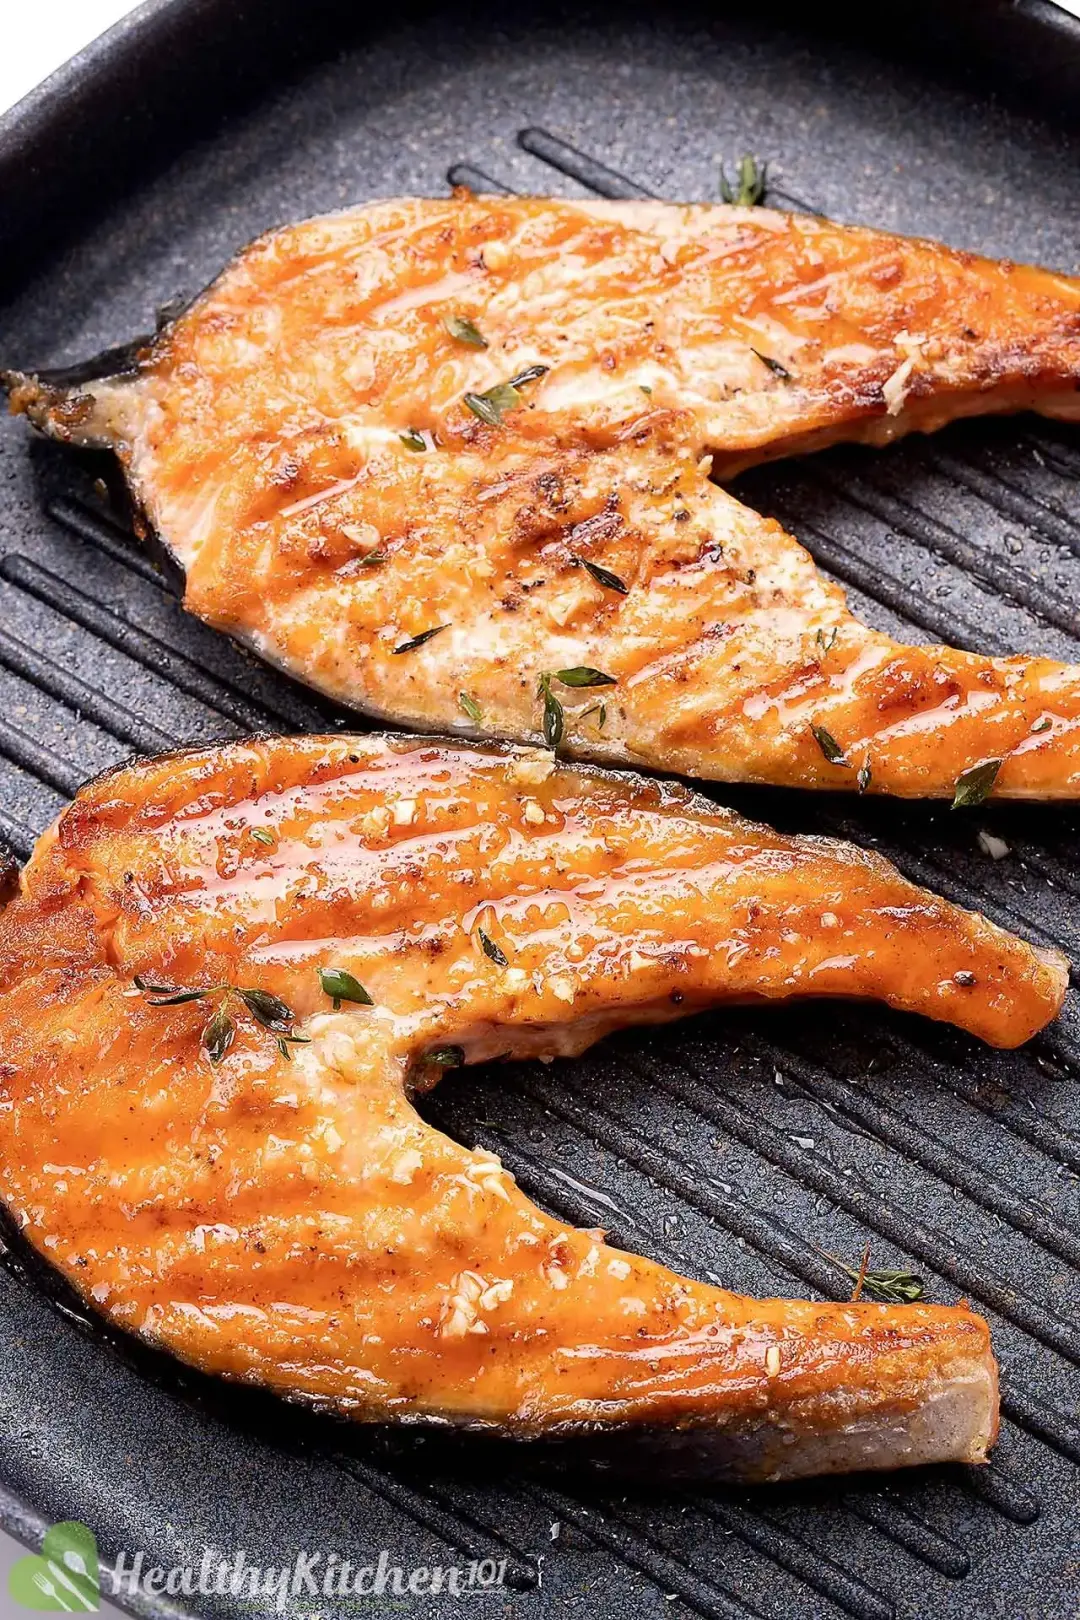 Two golden and glossy pieces of salmnon steak in a grill pan